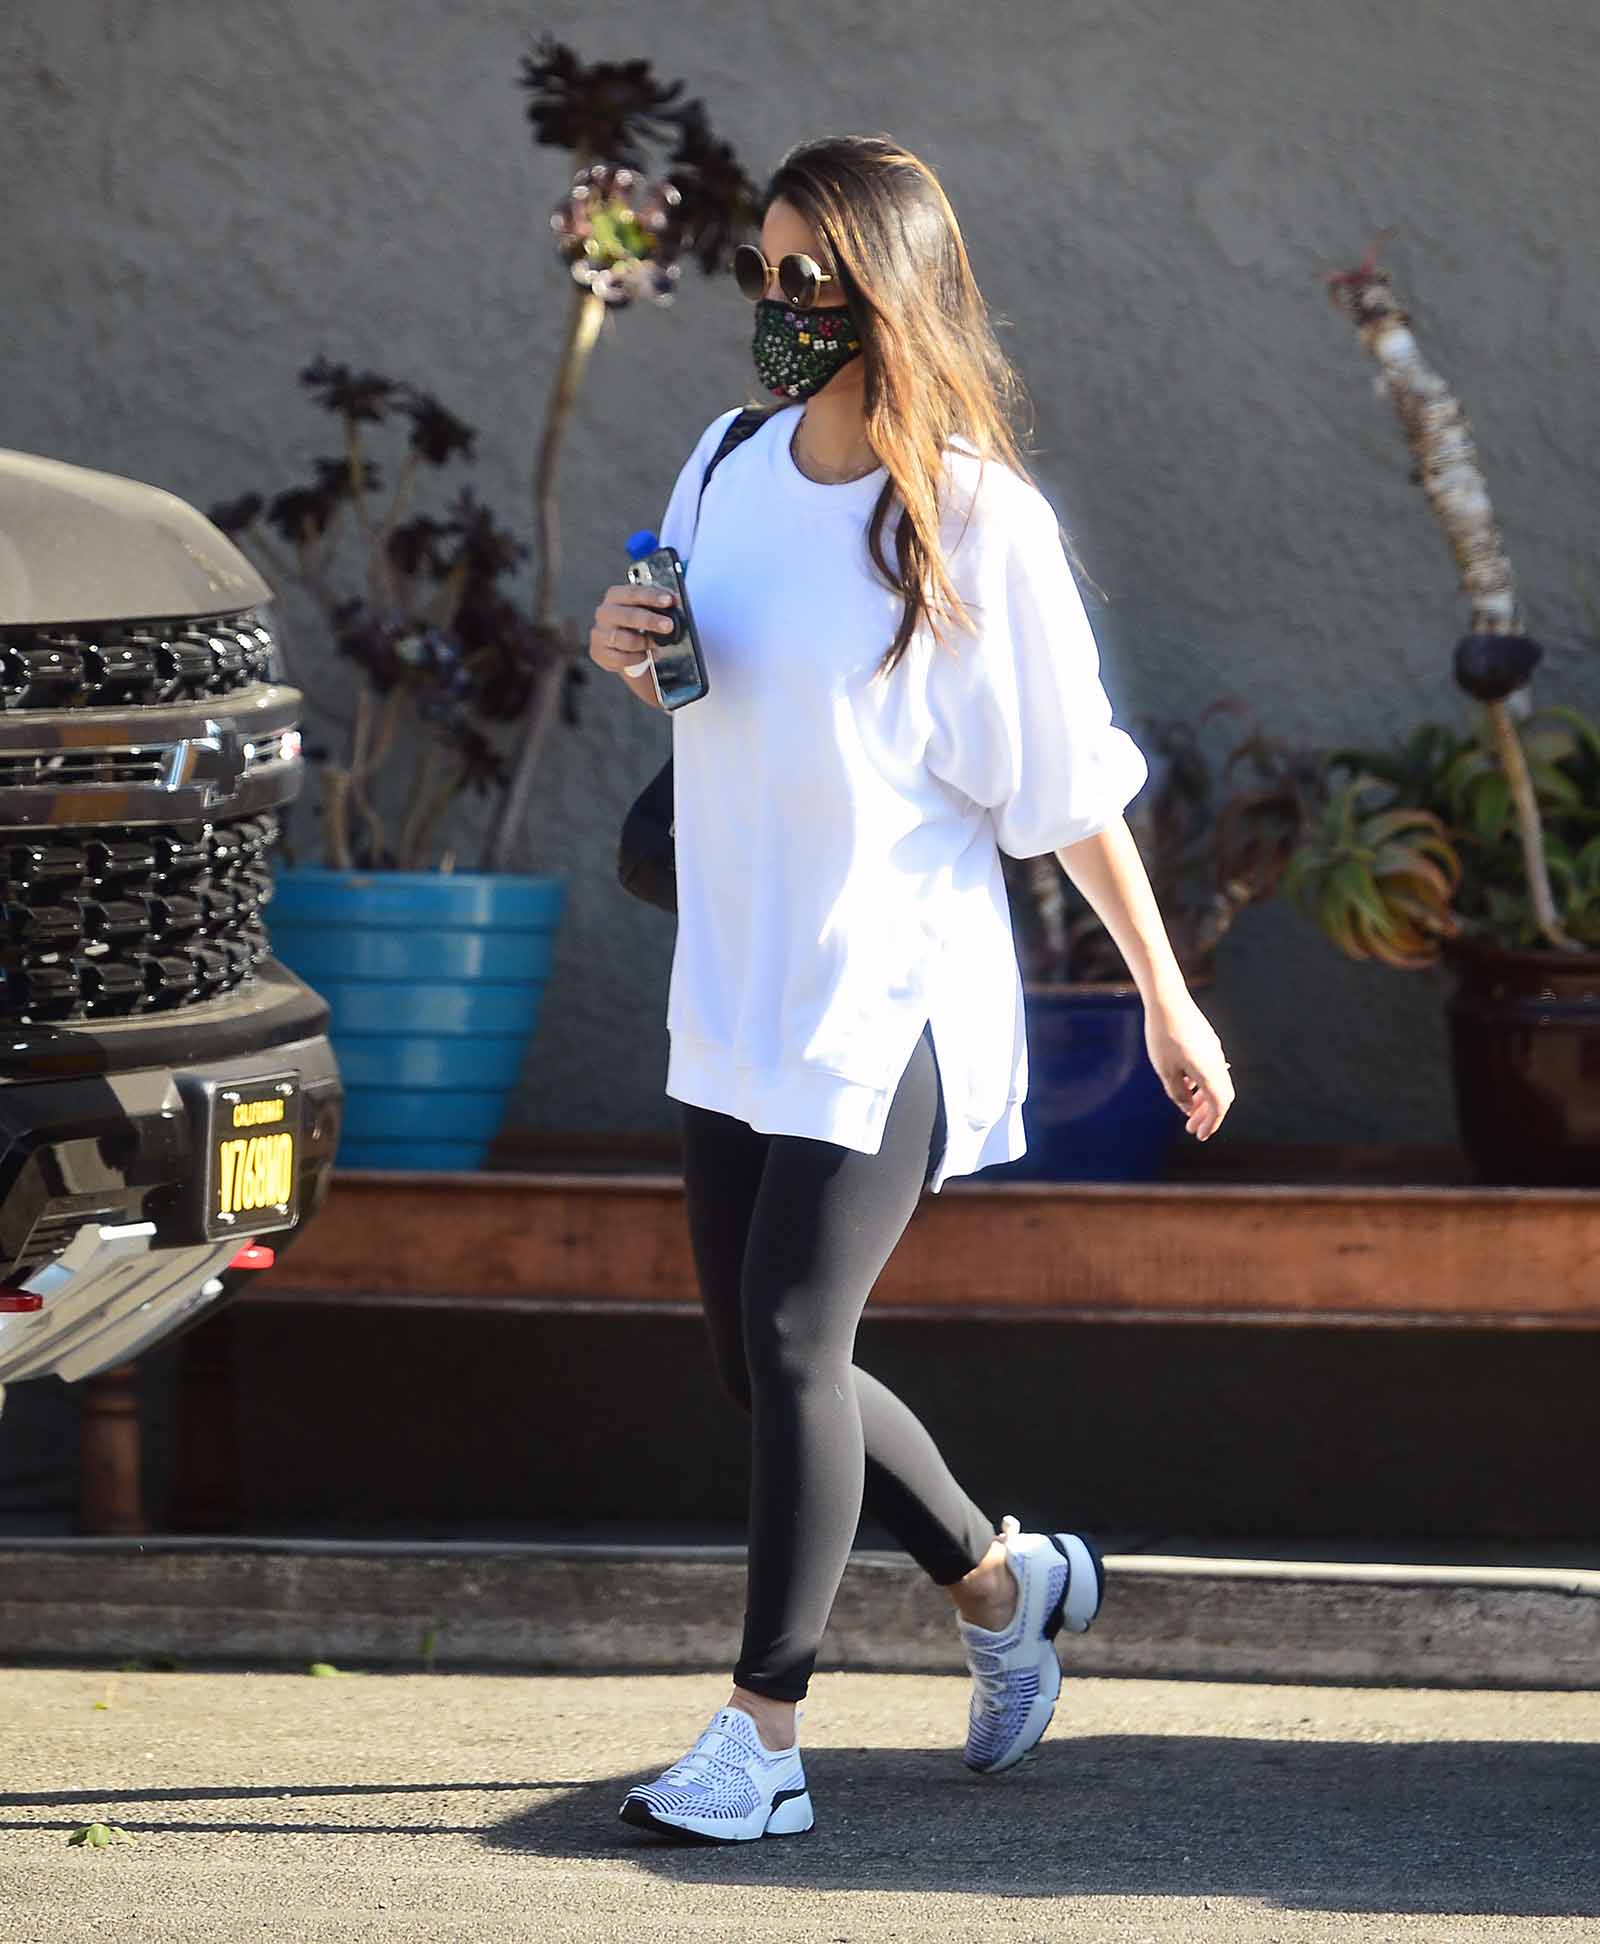 Love this casual activewear look!